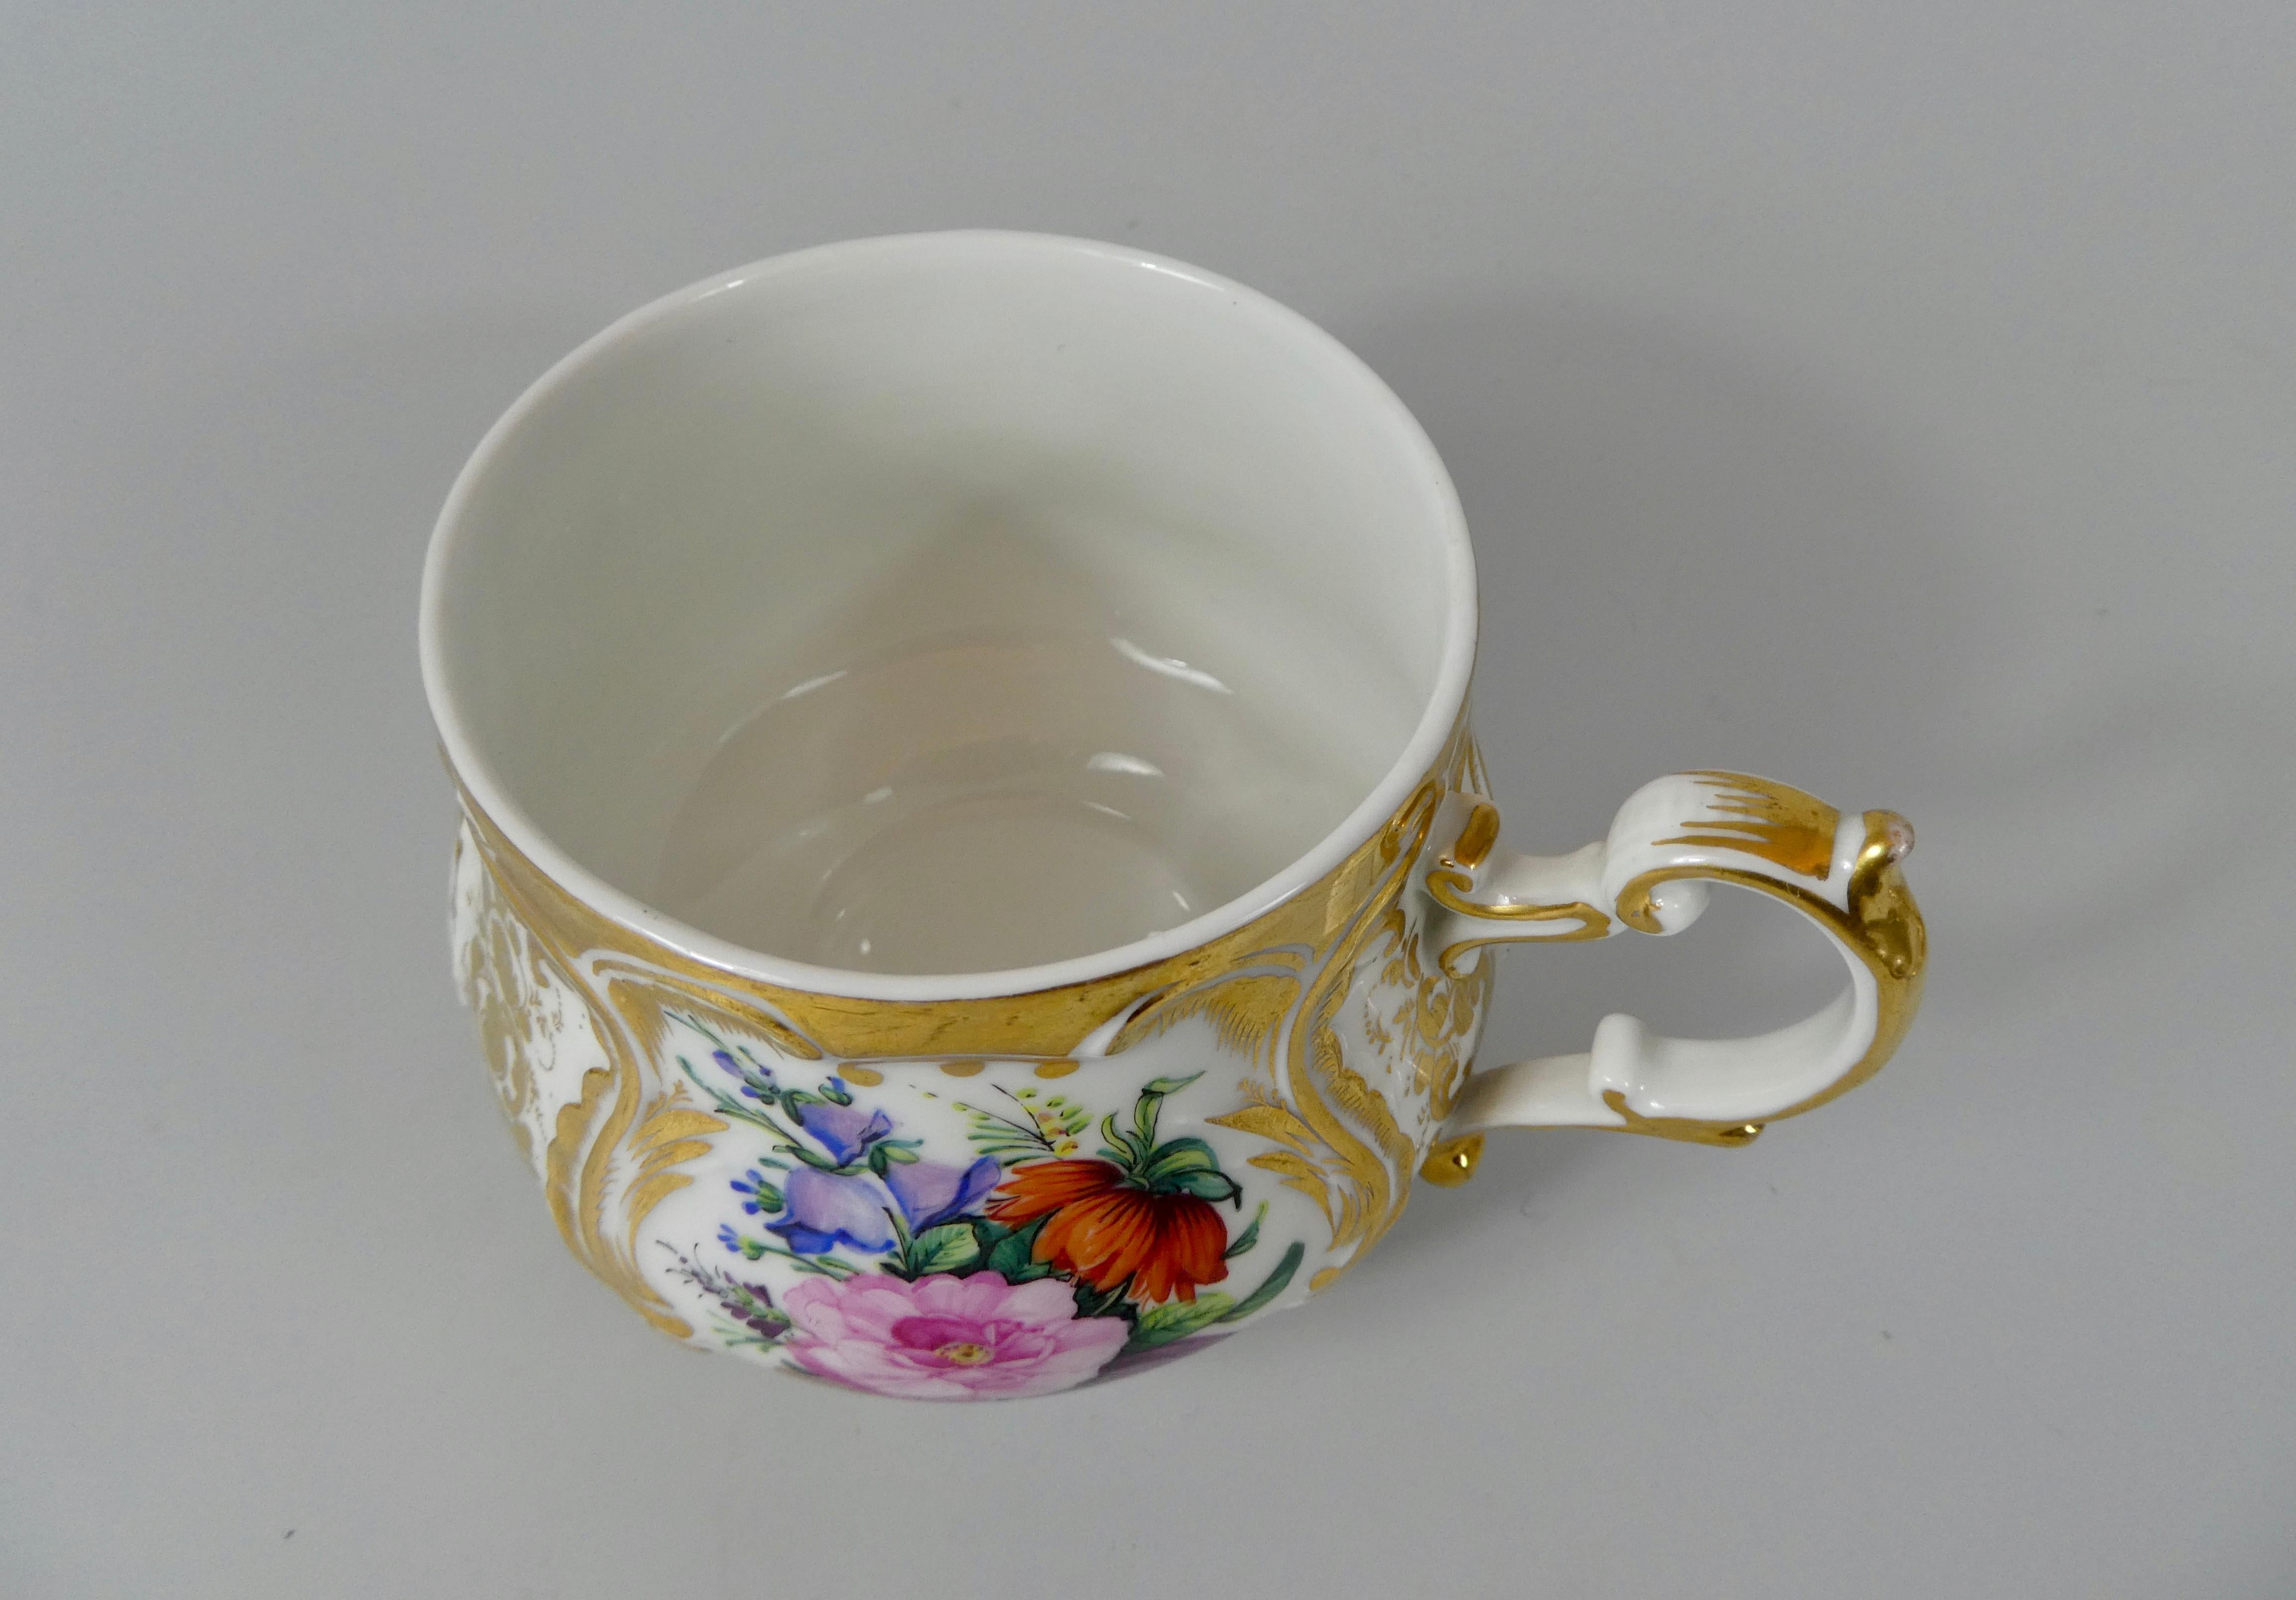 KPM Berlin Porcelain Chocolate Cup, Cover and Stand, circa 1860 7